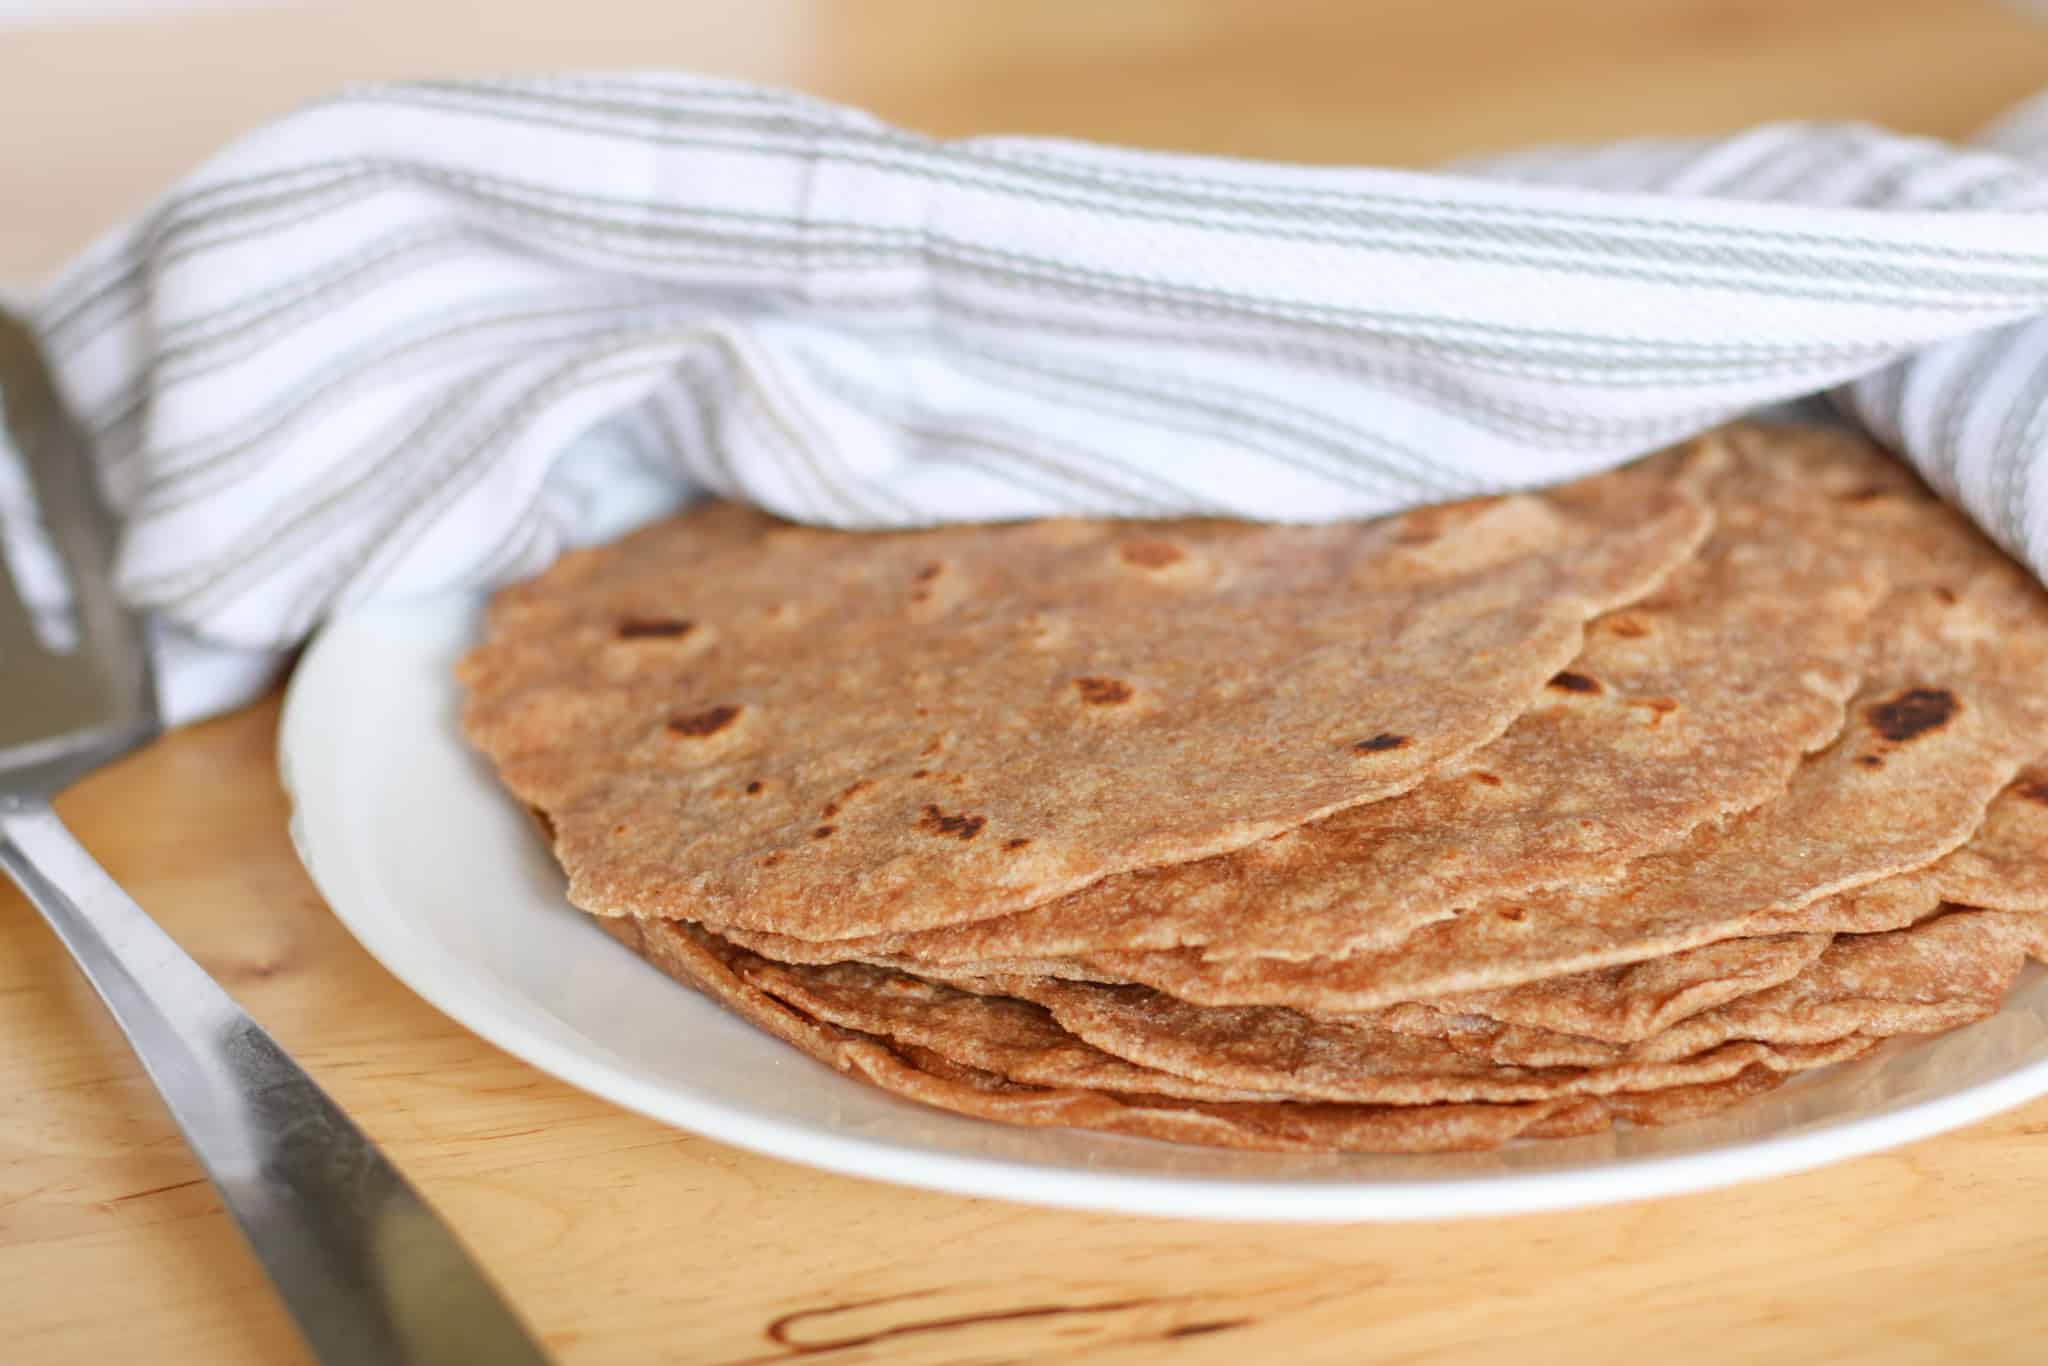 tortillas on plate covered with tea towel